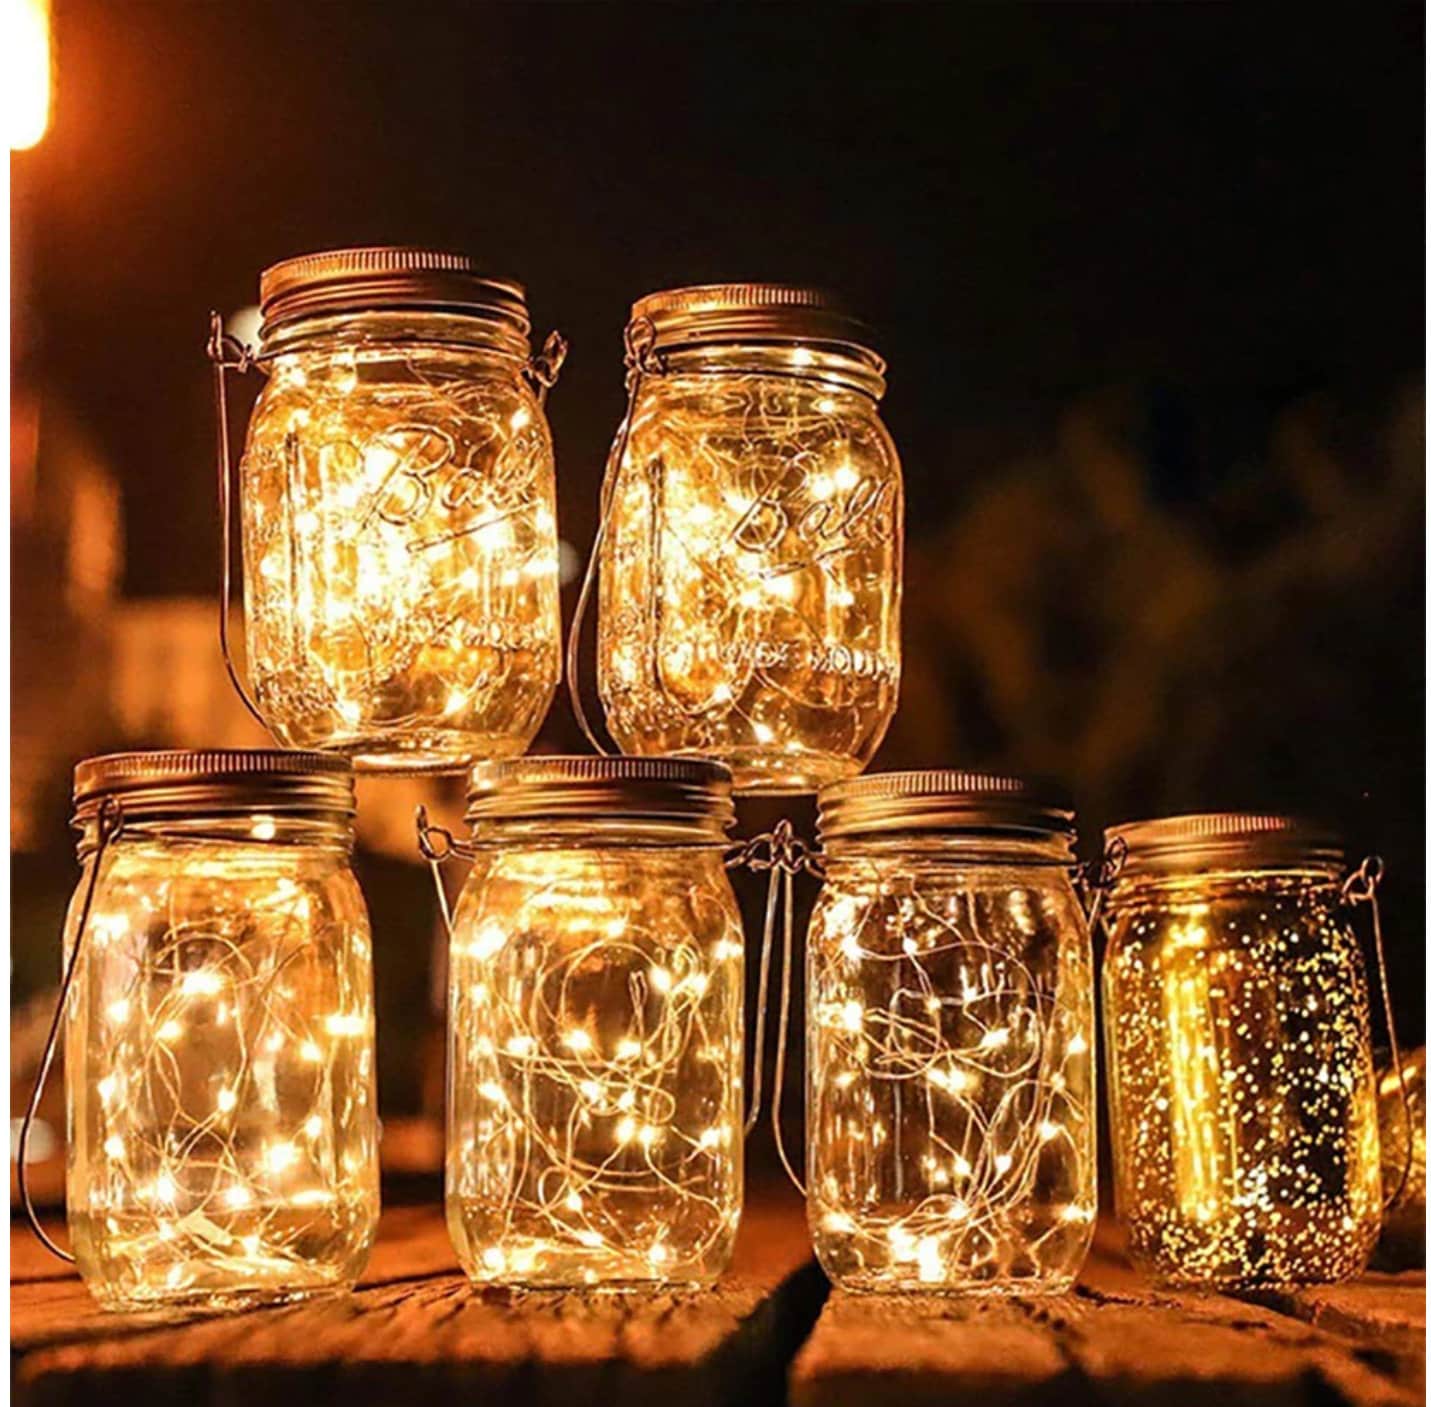 30 Pack Paper Lantern Lights Battery Operated Warm White Hanging LED Lights  Super Bright Easy Use Decorative Lighting for Outdoor/Indoor Wedding